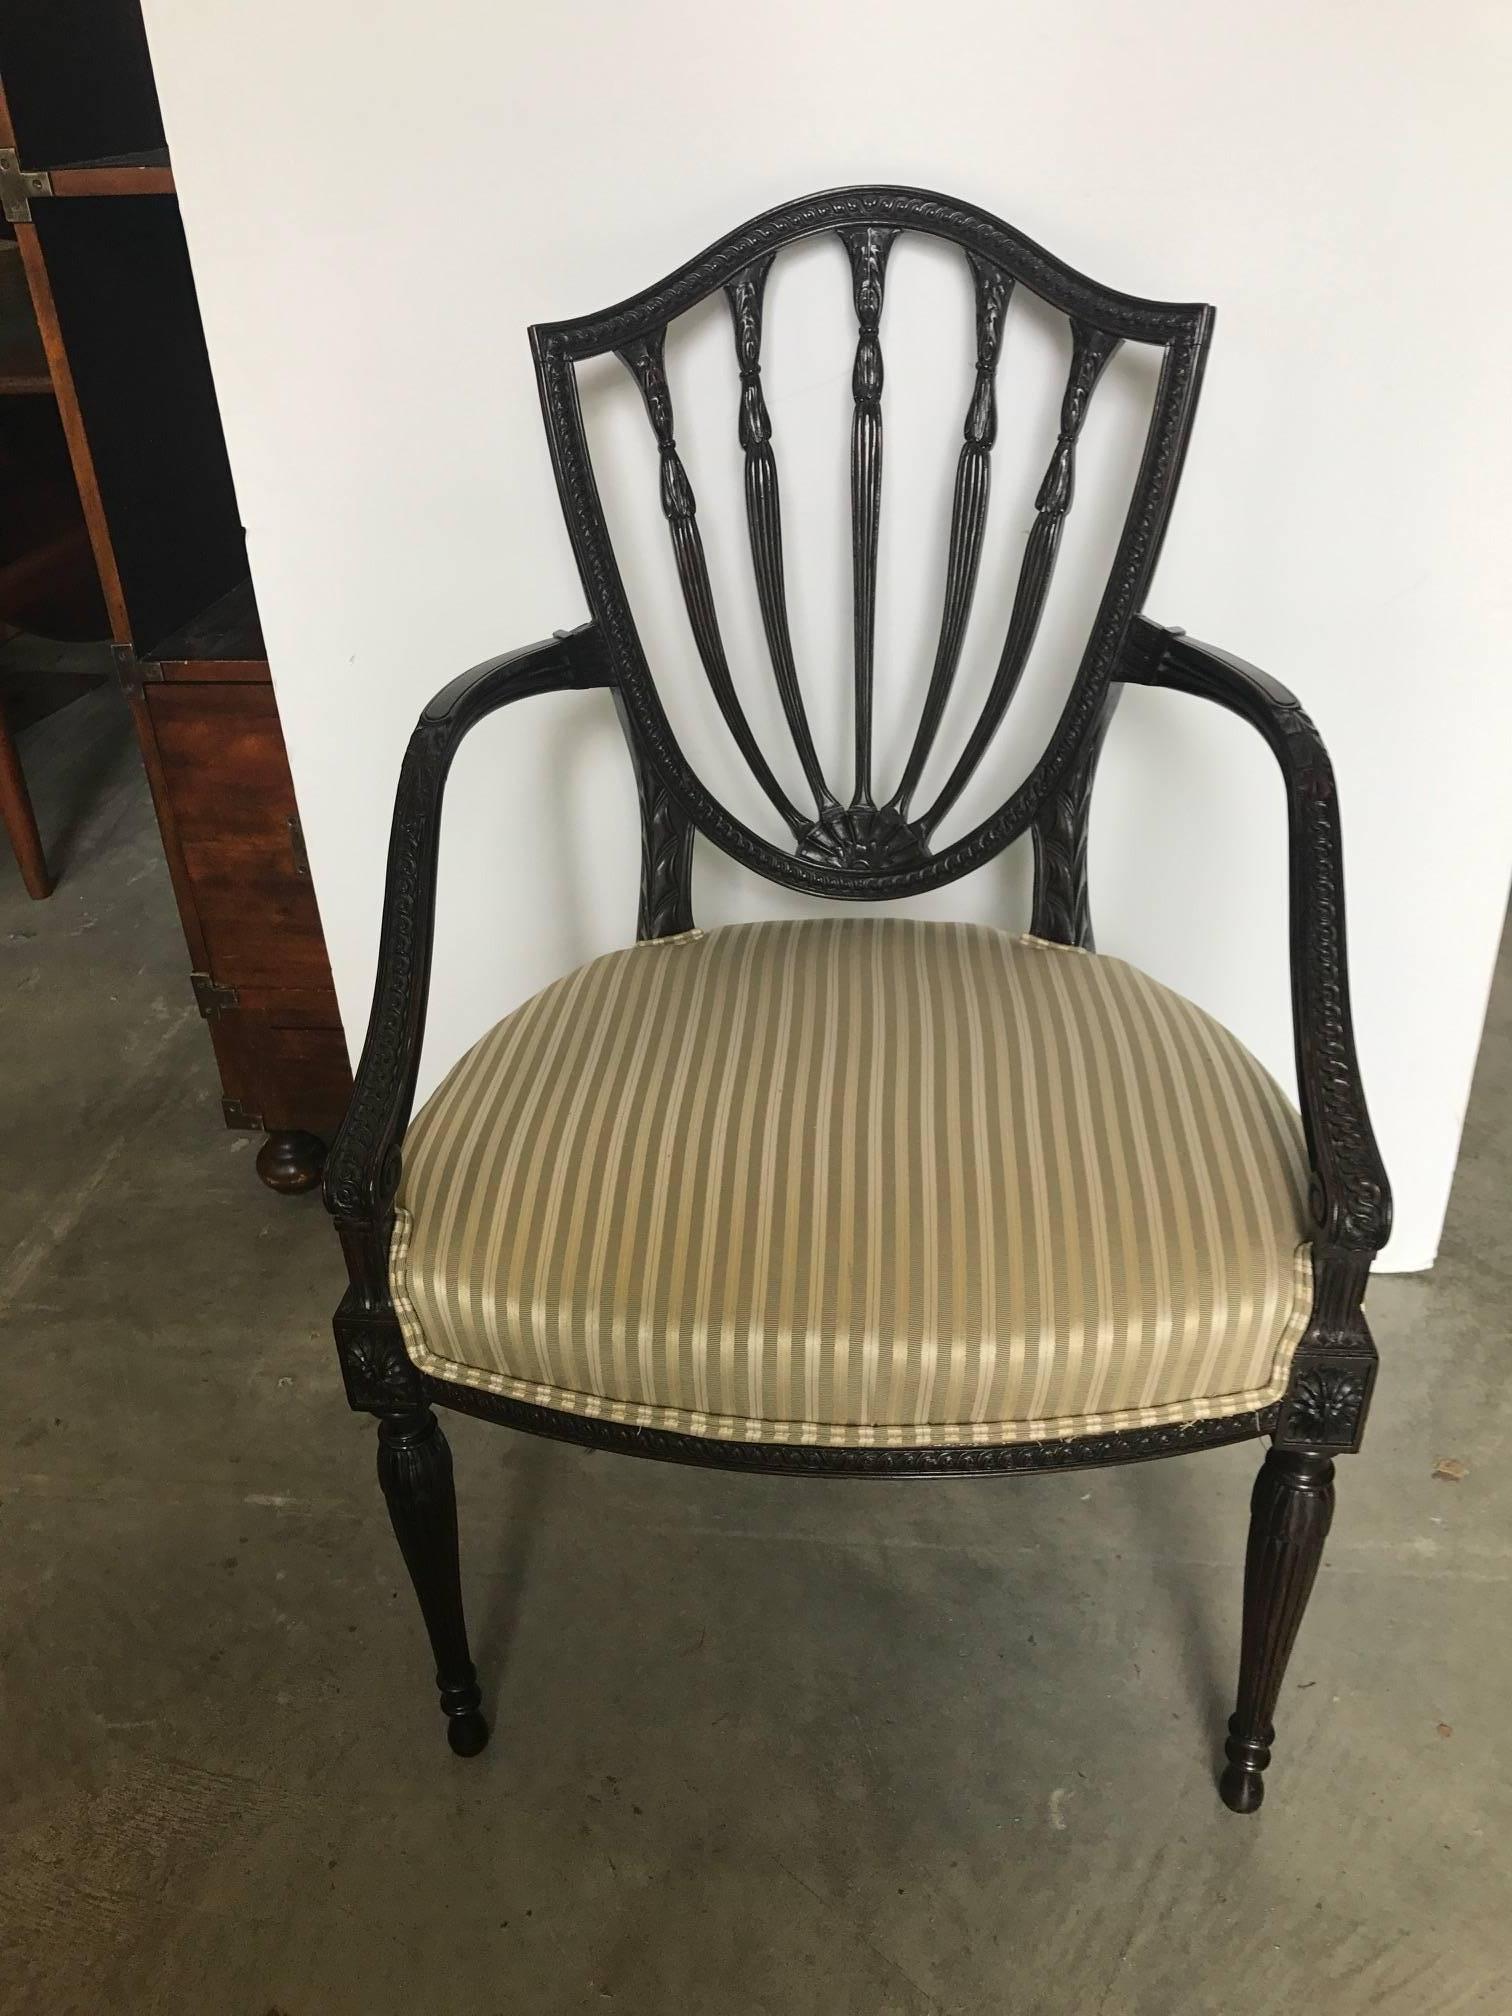 Elegant and graceful hand-carved mid-19th century shield back Hepplewhite armchair. The dark mahogany frame is expertly carved all along the frame. The corners have rosettes with tapered reeded legs. The seat is an hourglass coil spring construction